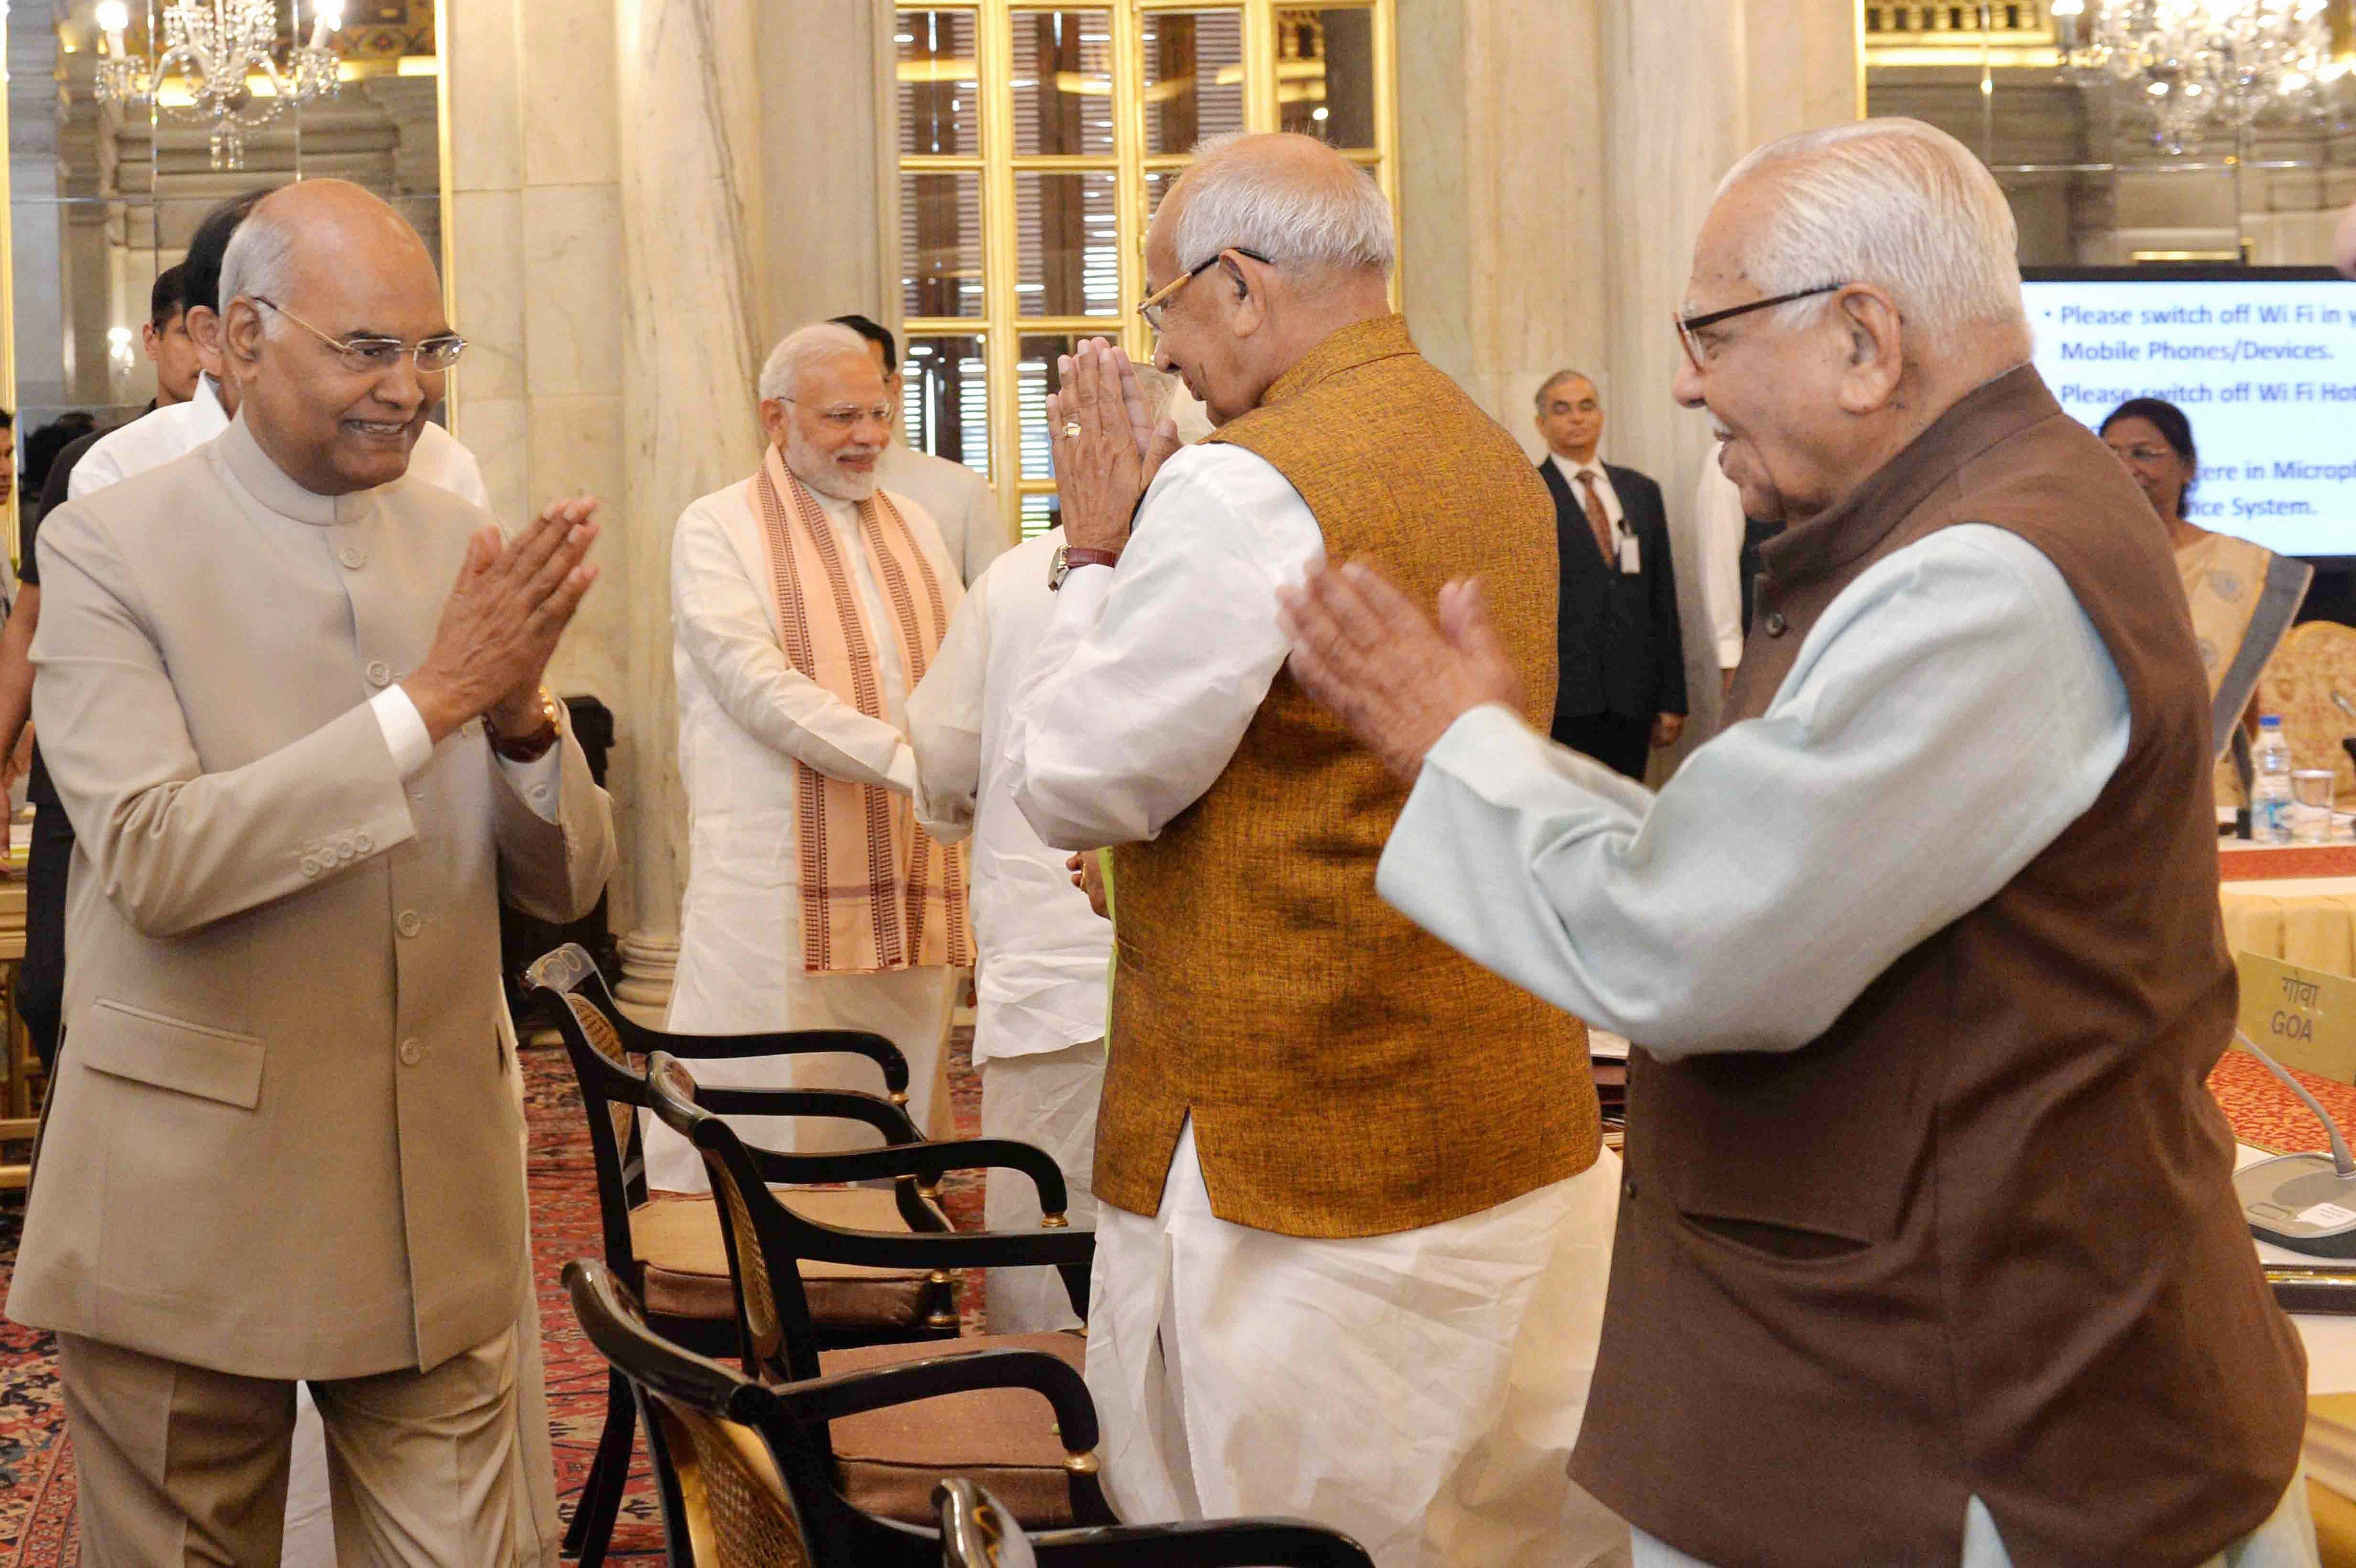 President Ram Nath Kovind exchanges greetings with Governors Kaptan Singh Solanki and Ram Naik at the Conference of Governors at Rashtrapati Bhavan, in New Delhi on Monday. PTI